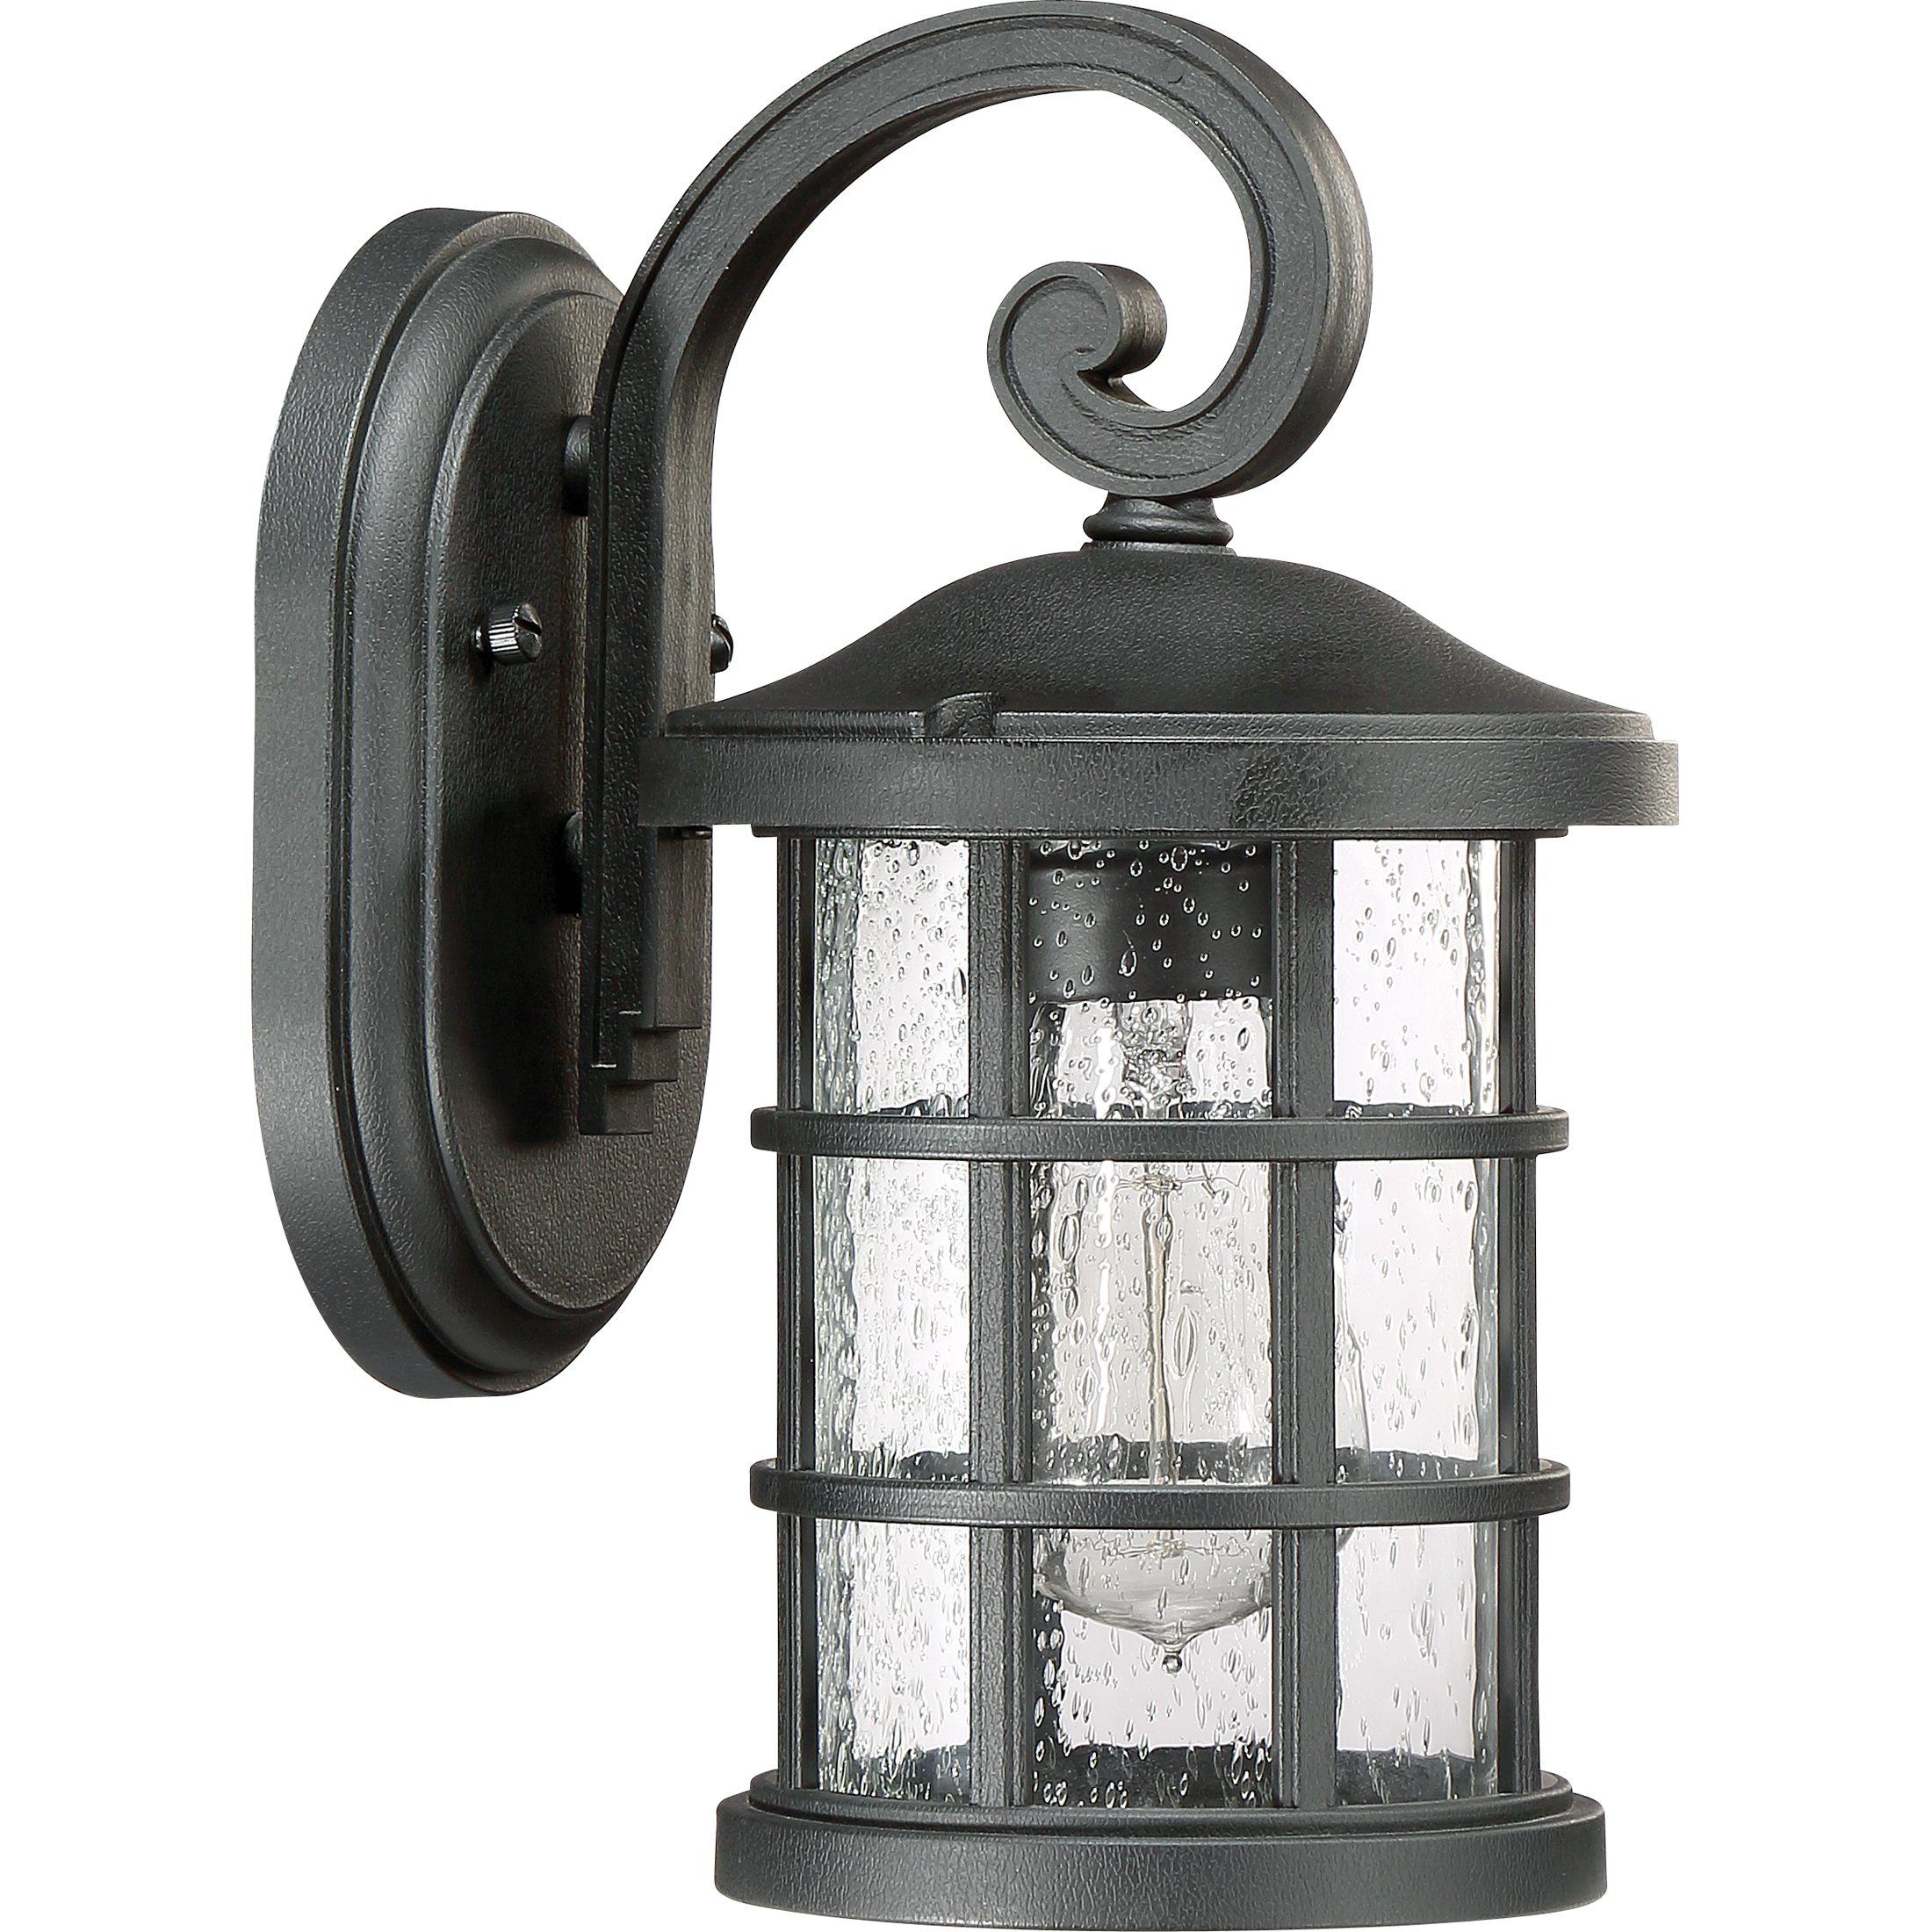 Quoizel  Crusade Outdoor Lantern, Small Outdoor l Wall Quoizel   